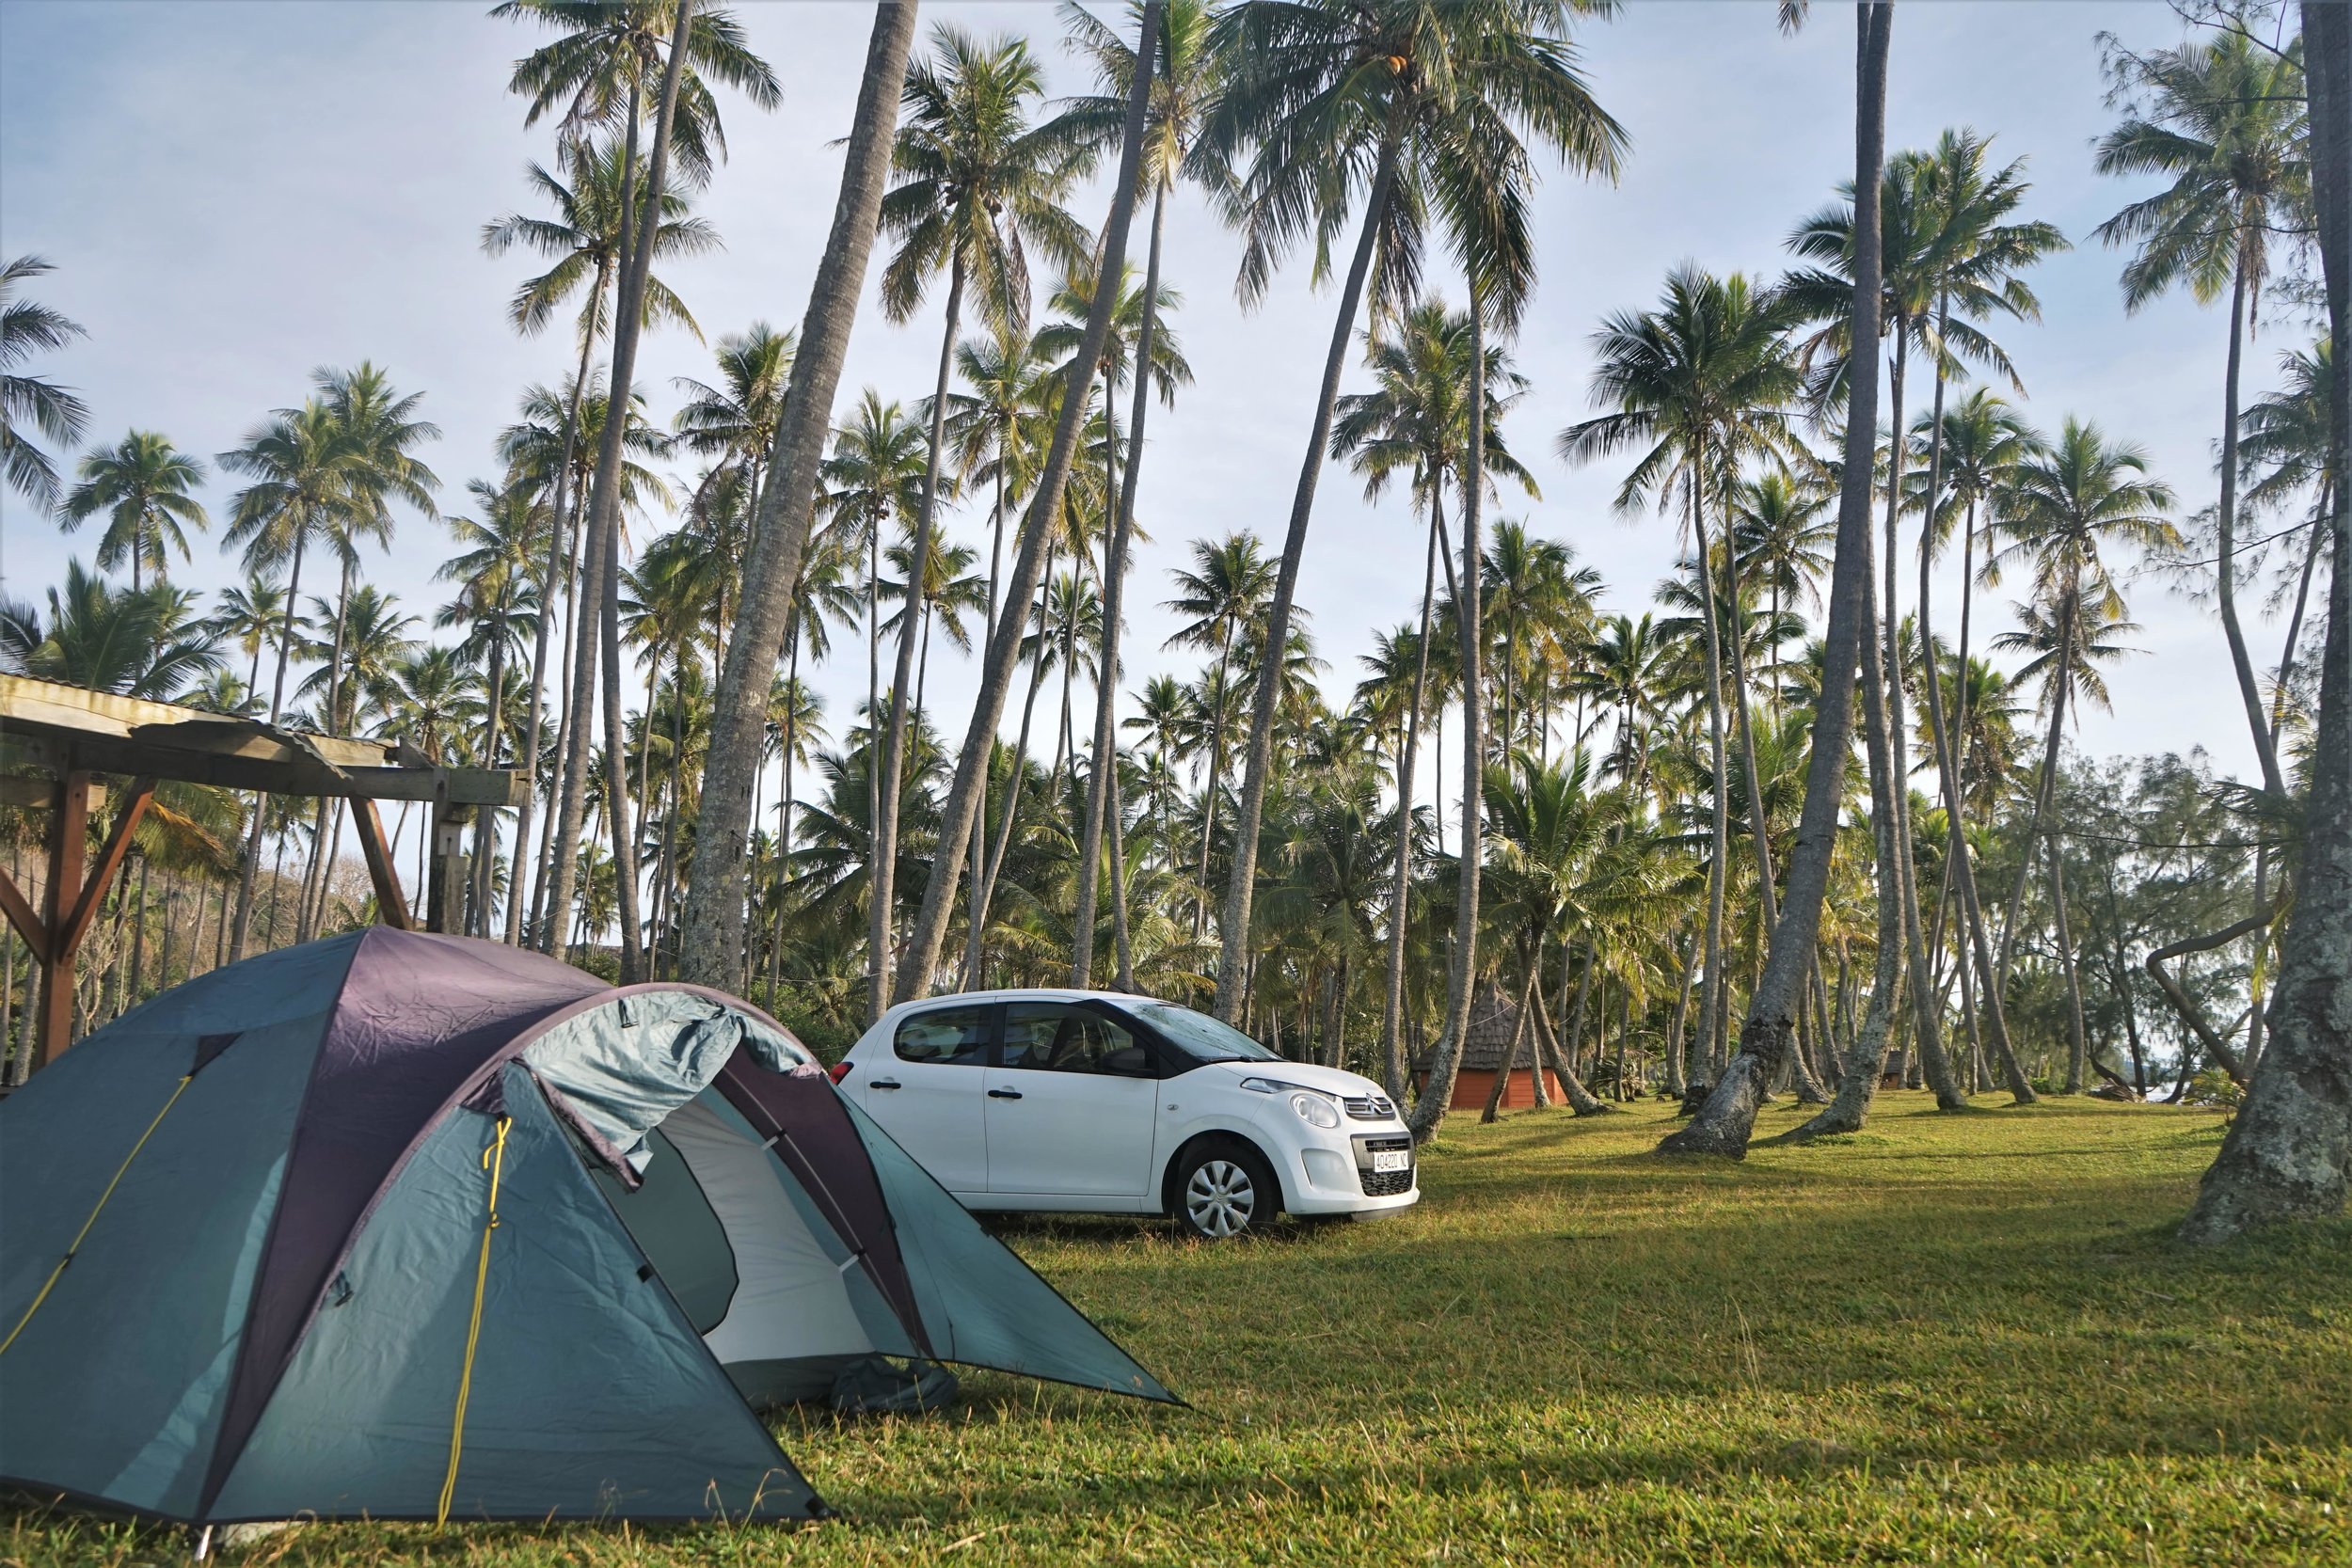 Camping in new Caledonia is one of our best New Caledonia travel tips.